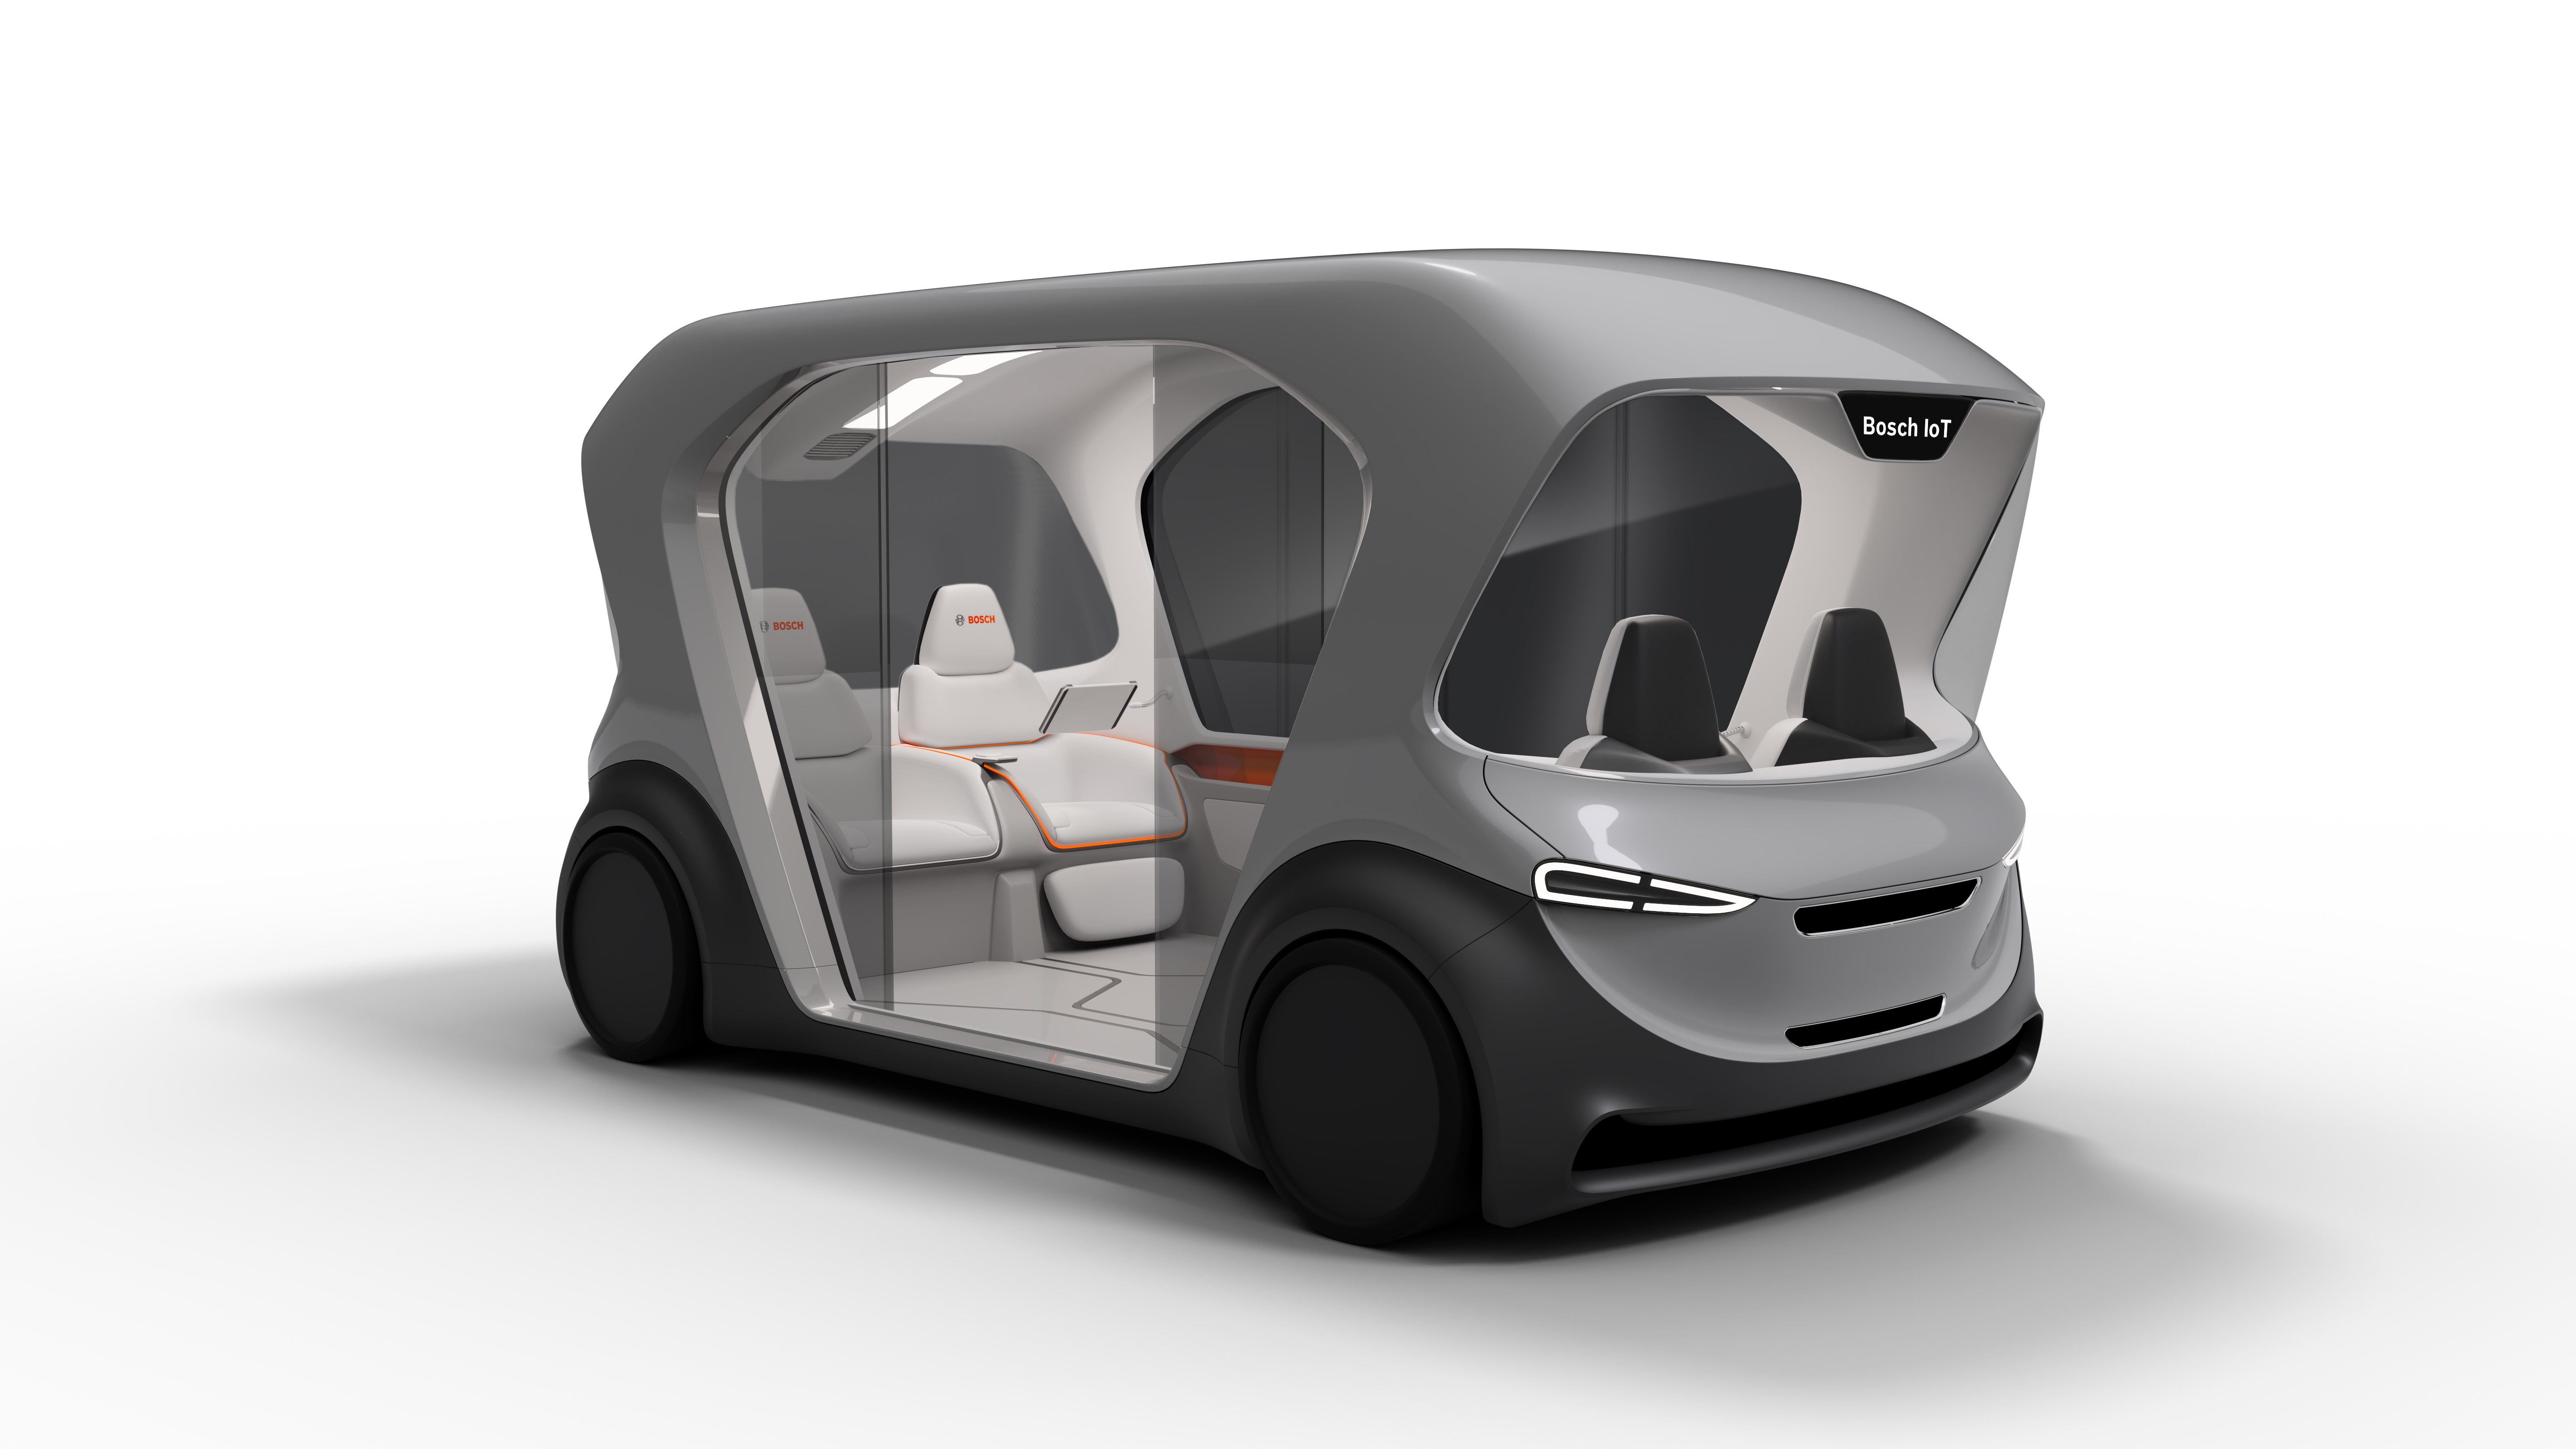 Debut of new concept shuttle at CES 2019 in Las Vegas